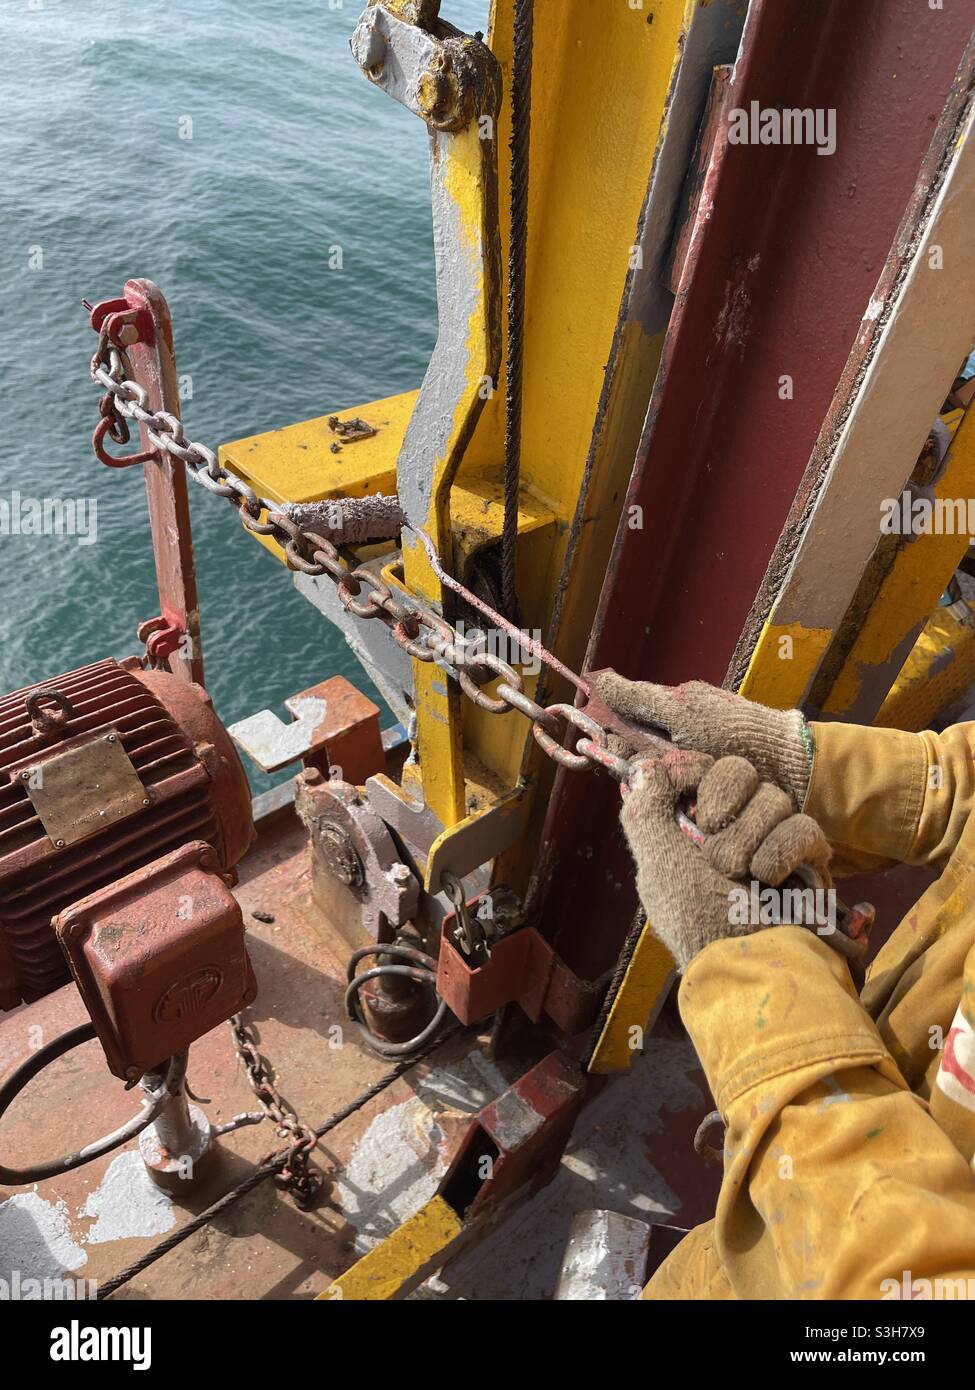 Crew member with cotton gloves of the merchant ship painting with primer paint of grey colour the chain of the pilot slant ladder using paint roller. Stock Photo